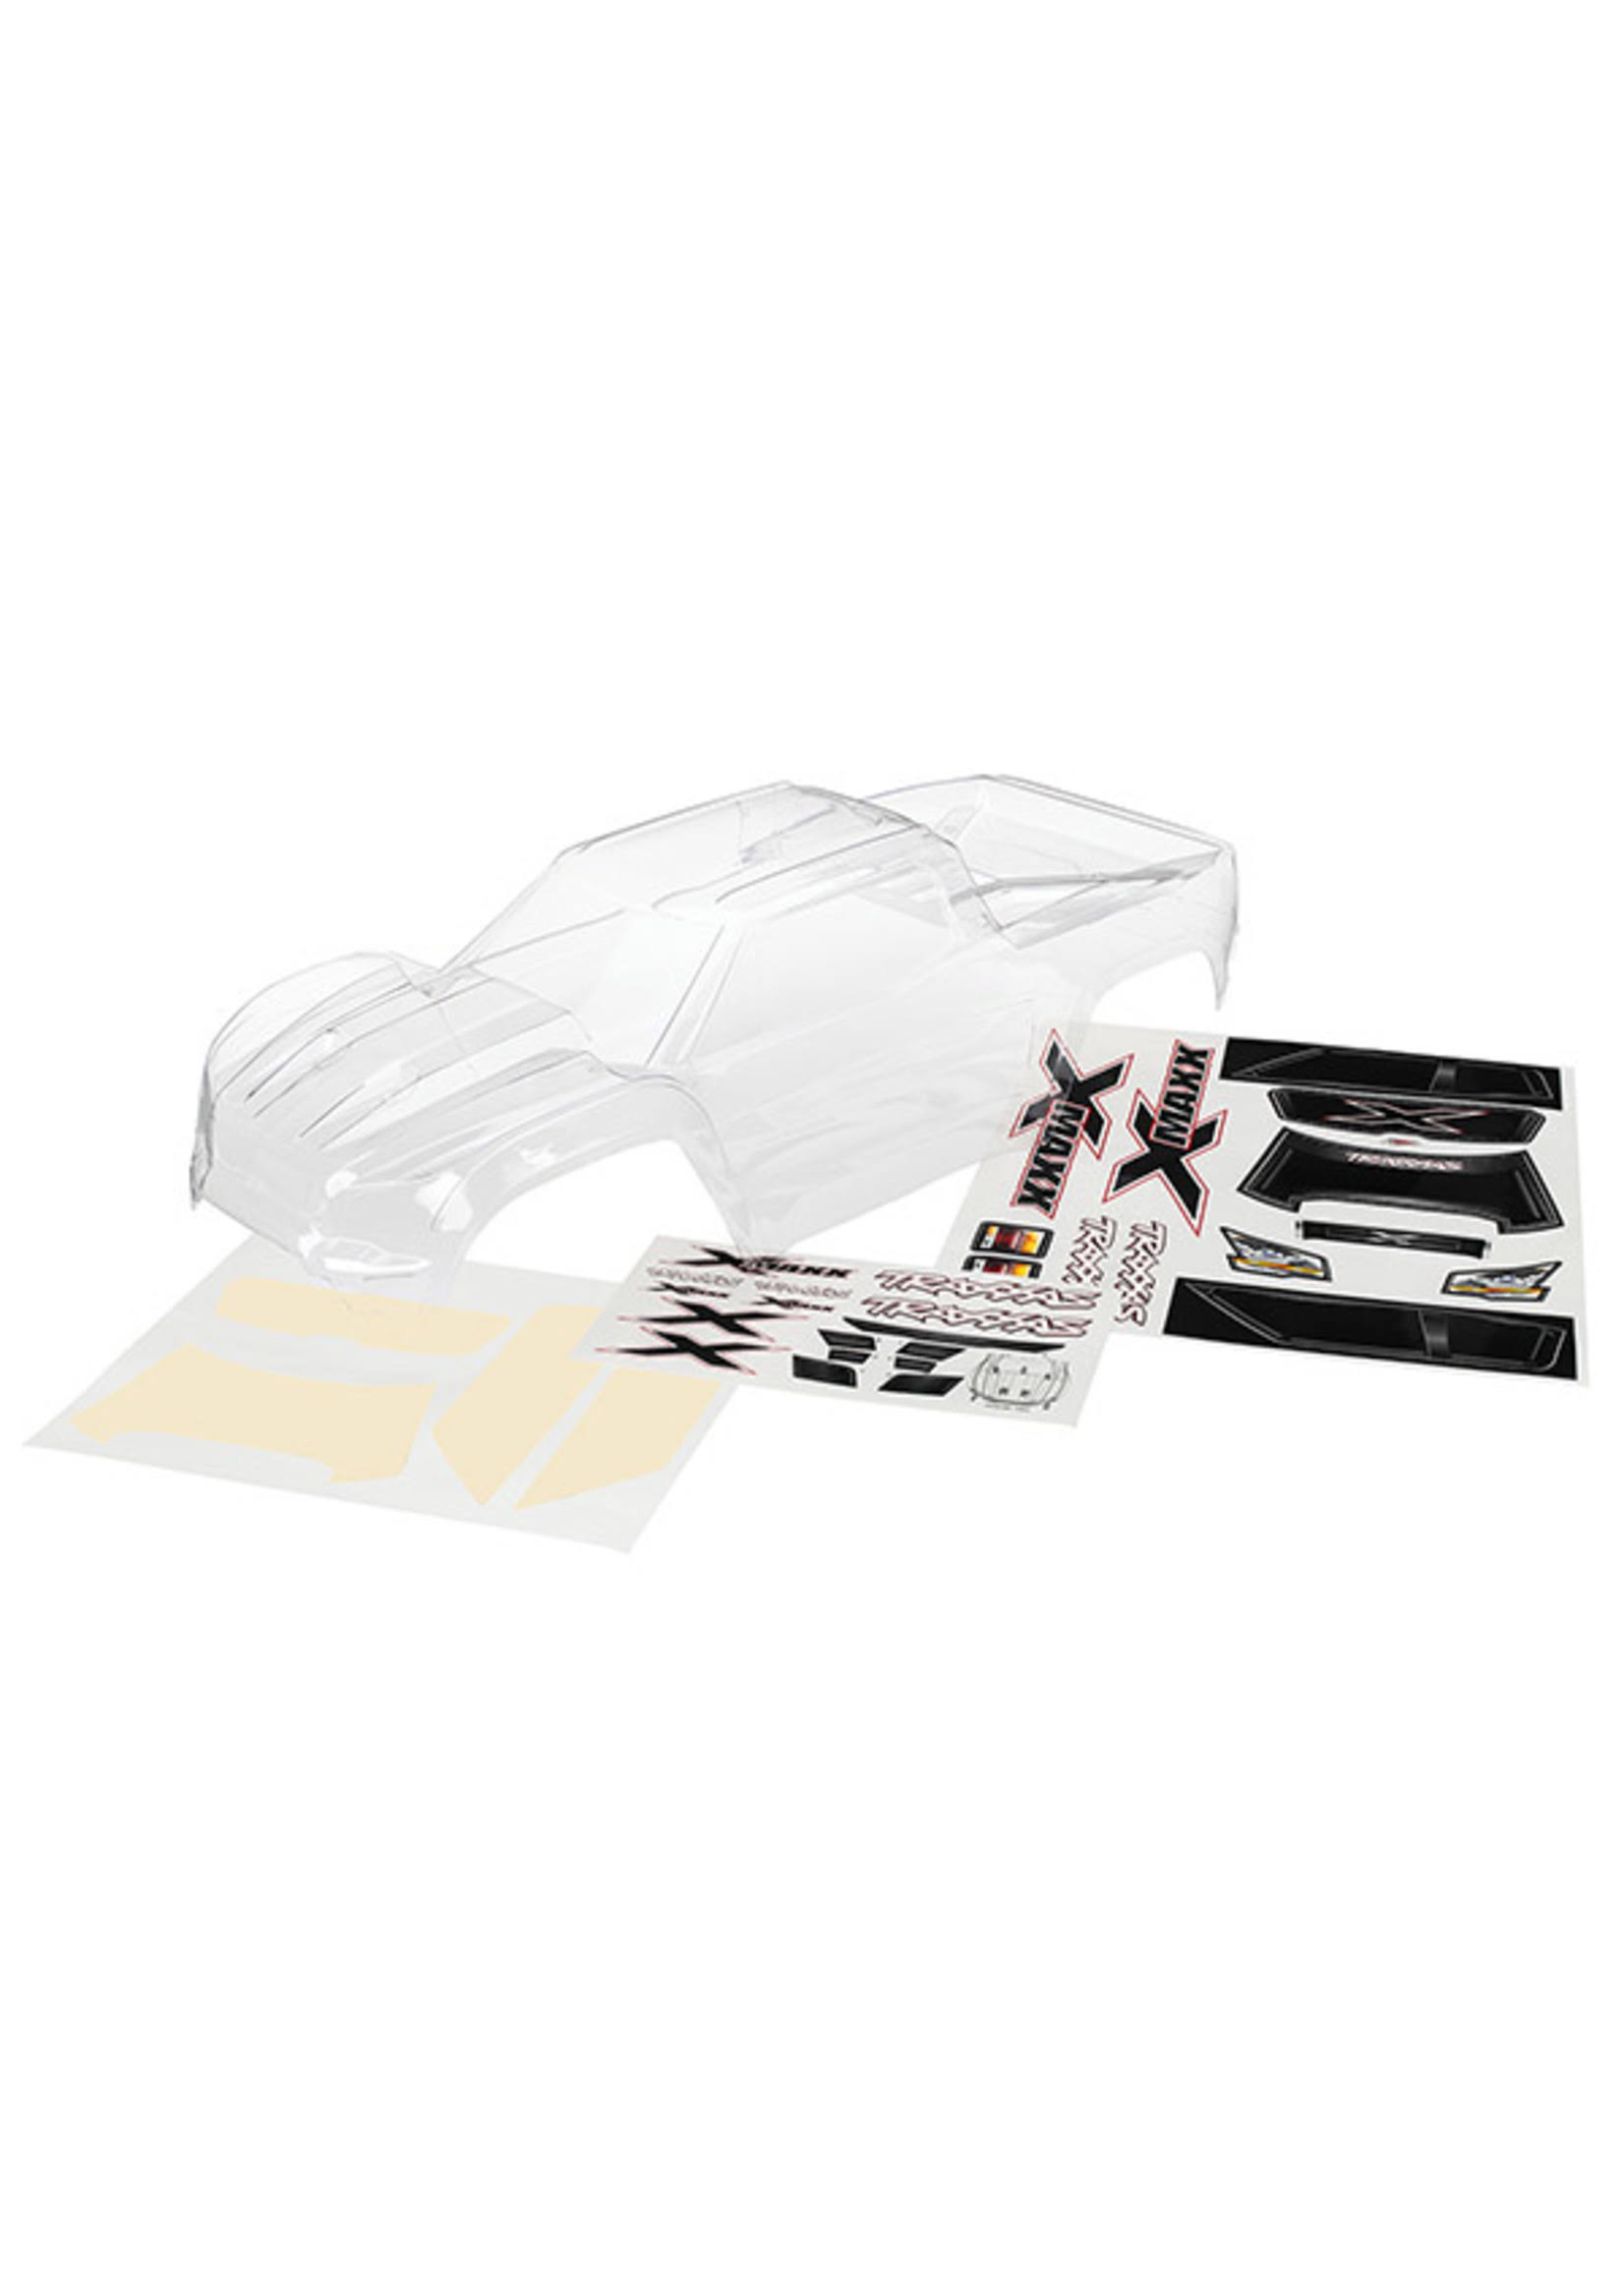 Traxxas 7711 RC Vehicle Clear X Maxx Body - with Decal Sheet